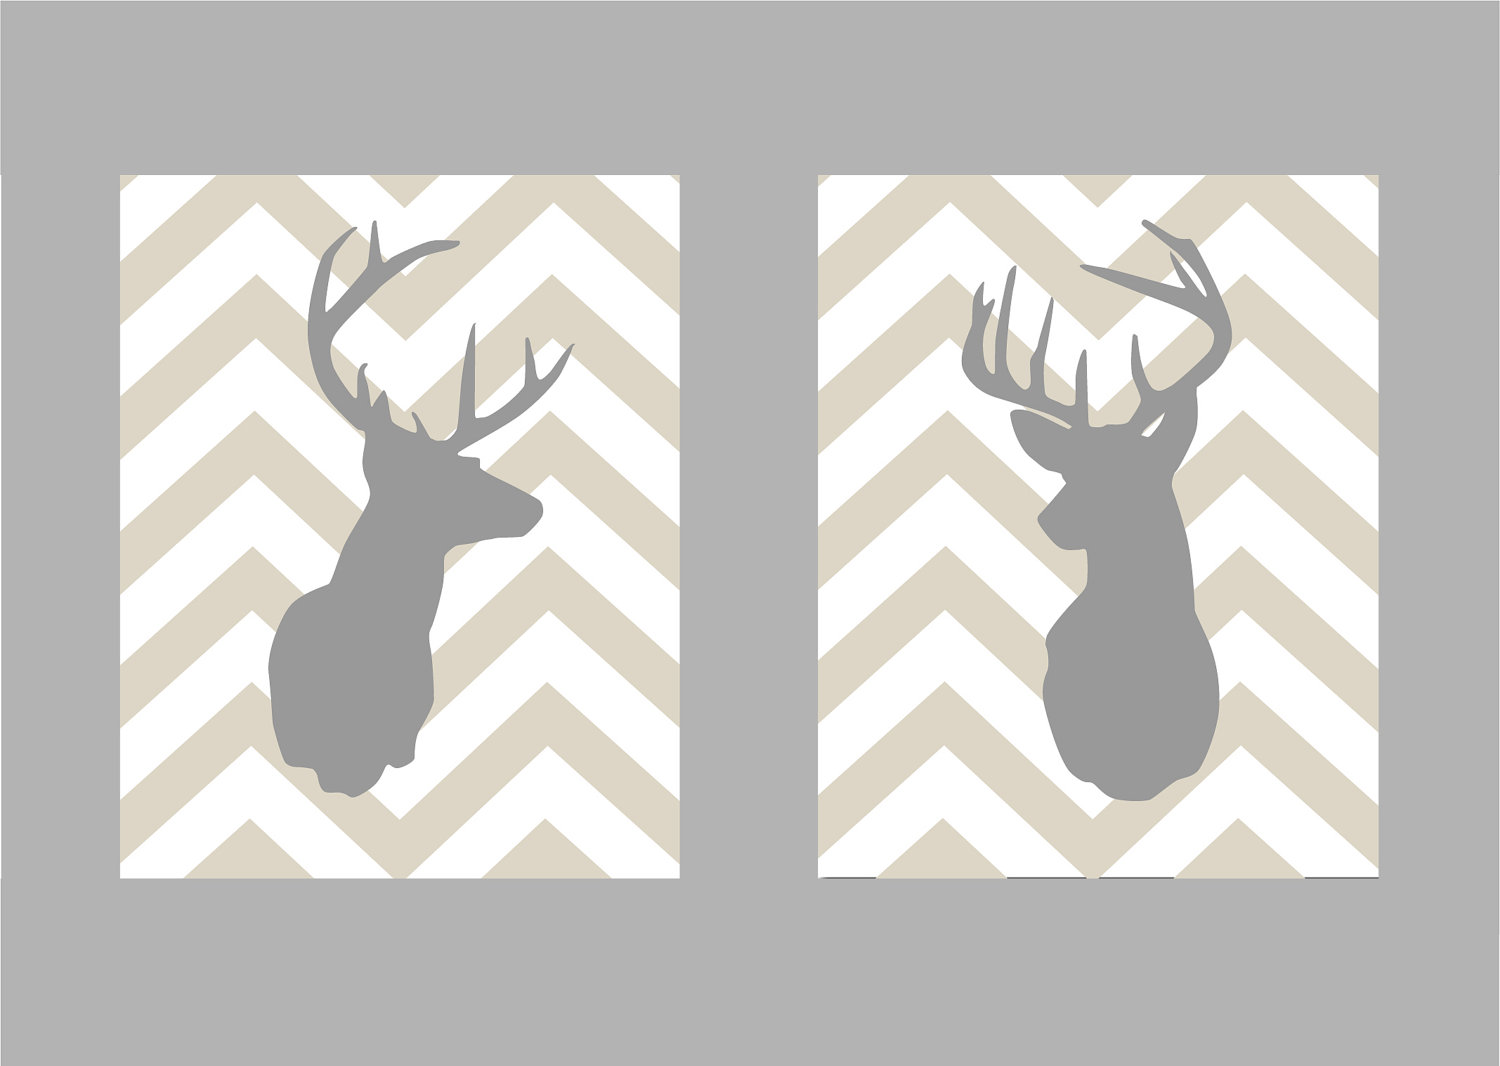 Popular items for deer head silhouette on Etsy